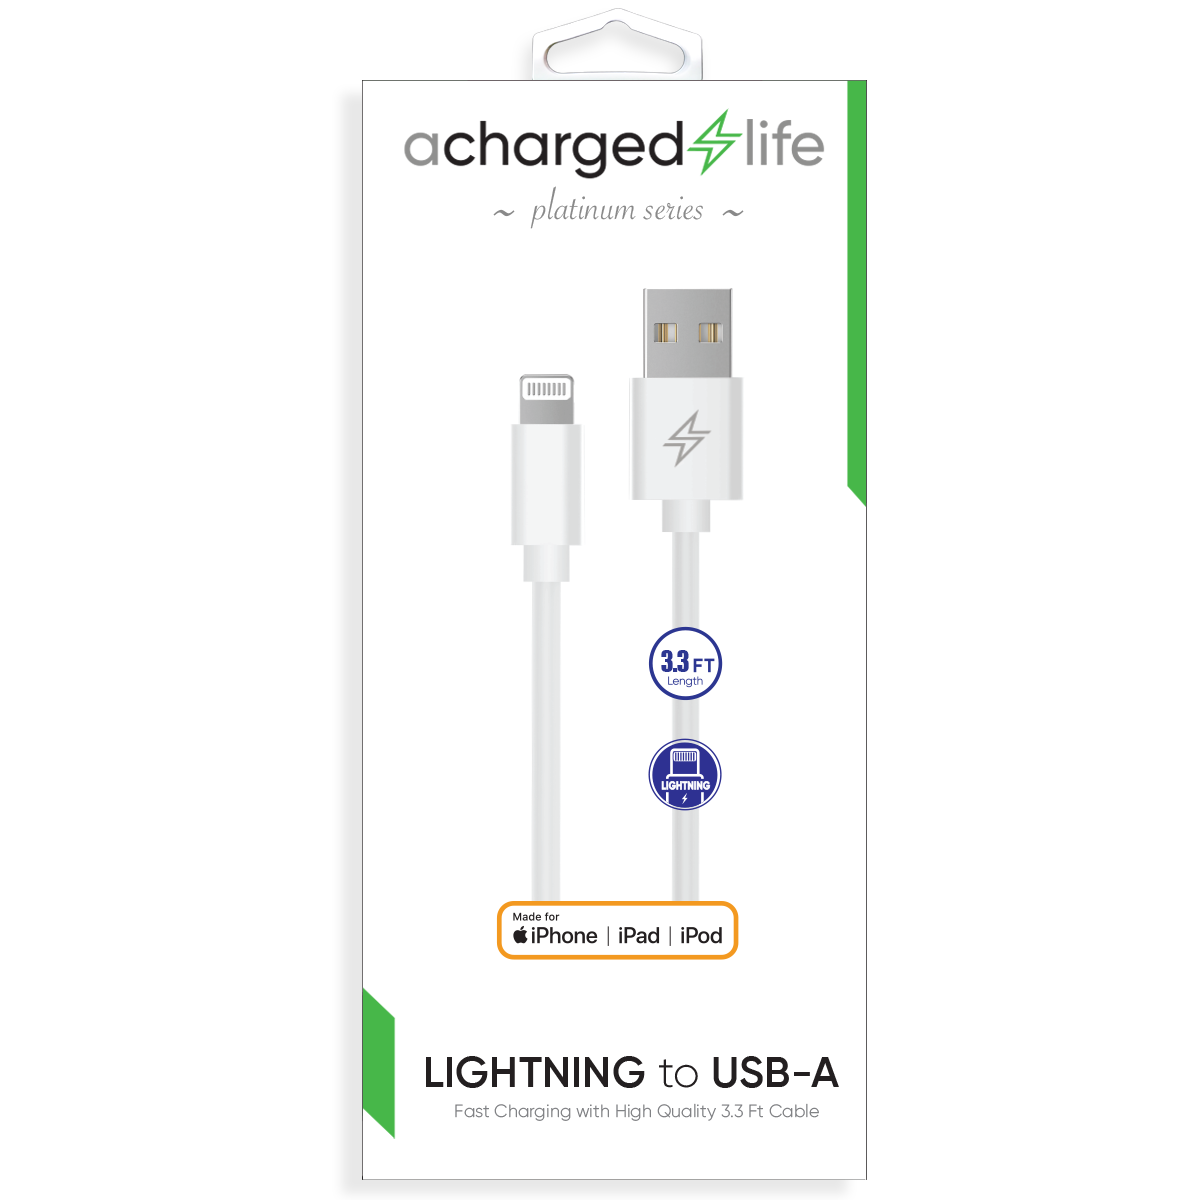 CL108 - Charging Cable Lightning 3.3Ft (MFI) White (PLATINUM SERIES)